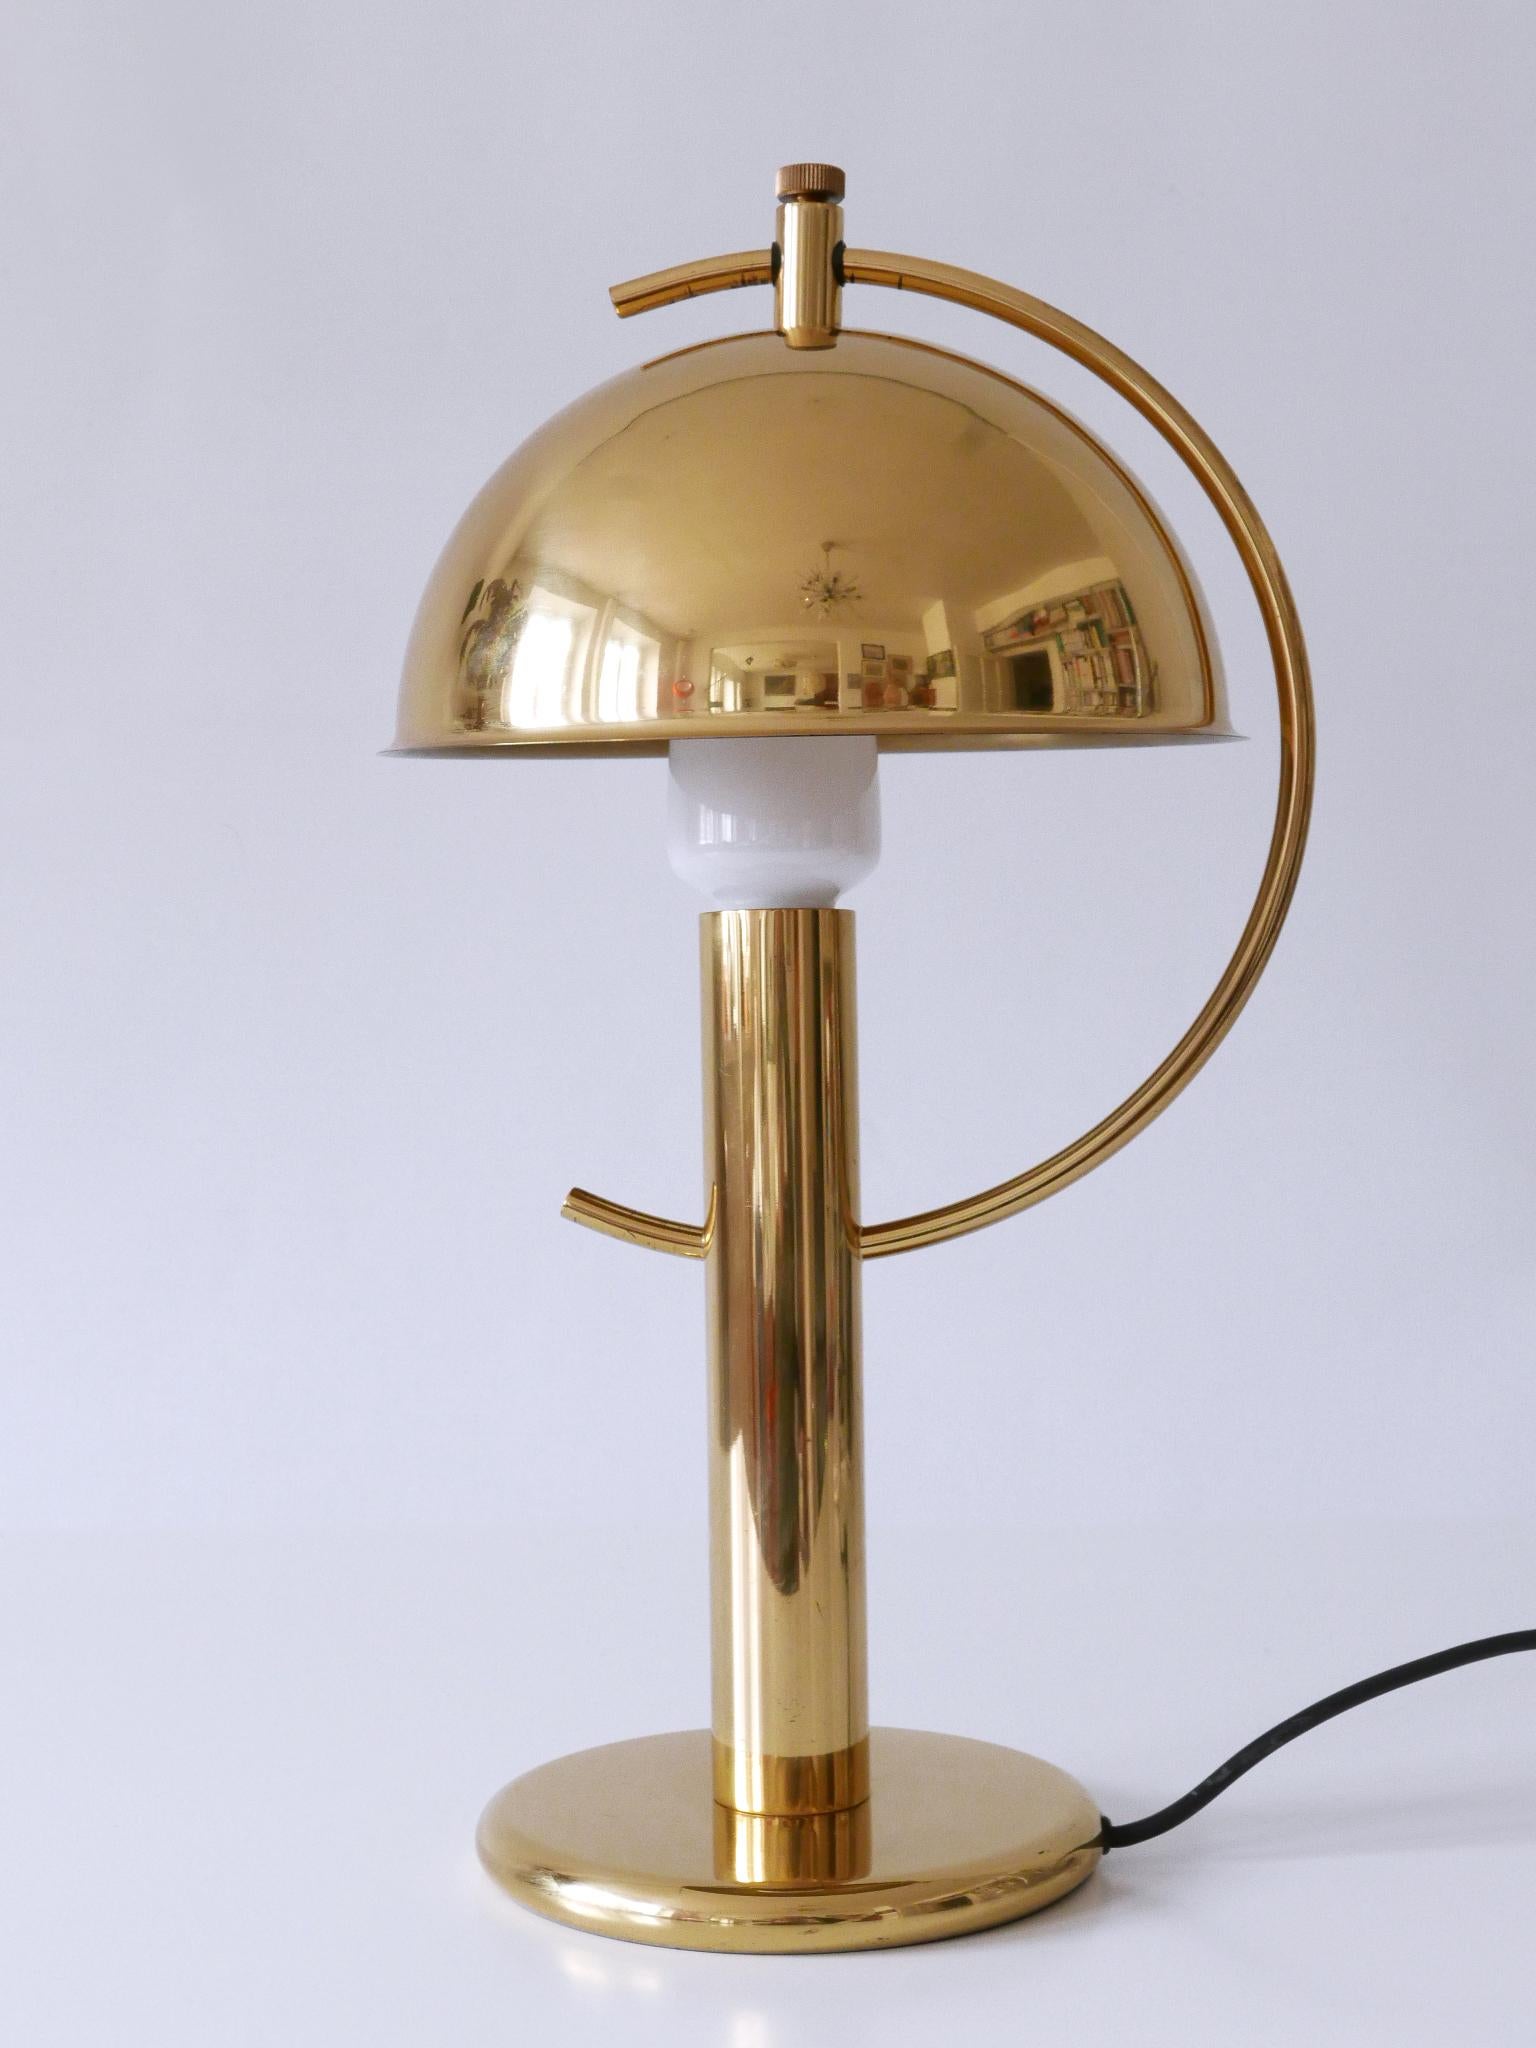 Exceptional Mid-Century Modern Brass Table Lamp by Gebrüder Cosack Germany 1960s For Sale 11